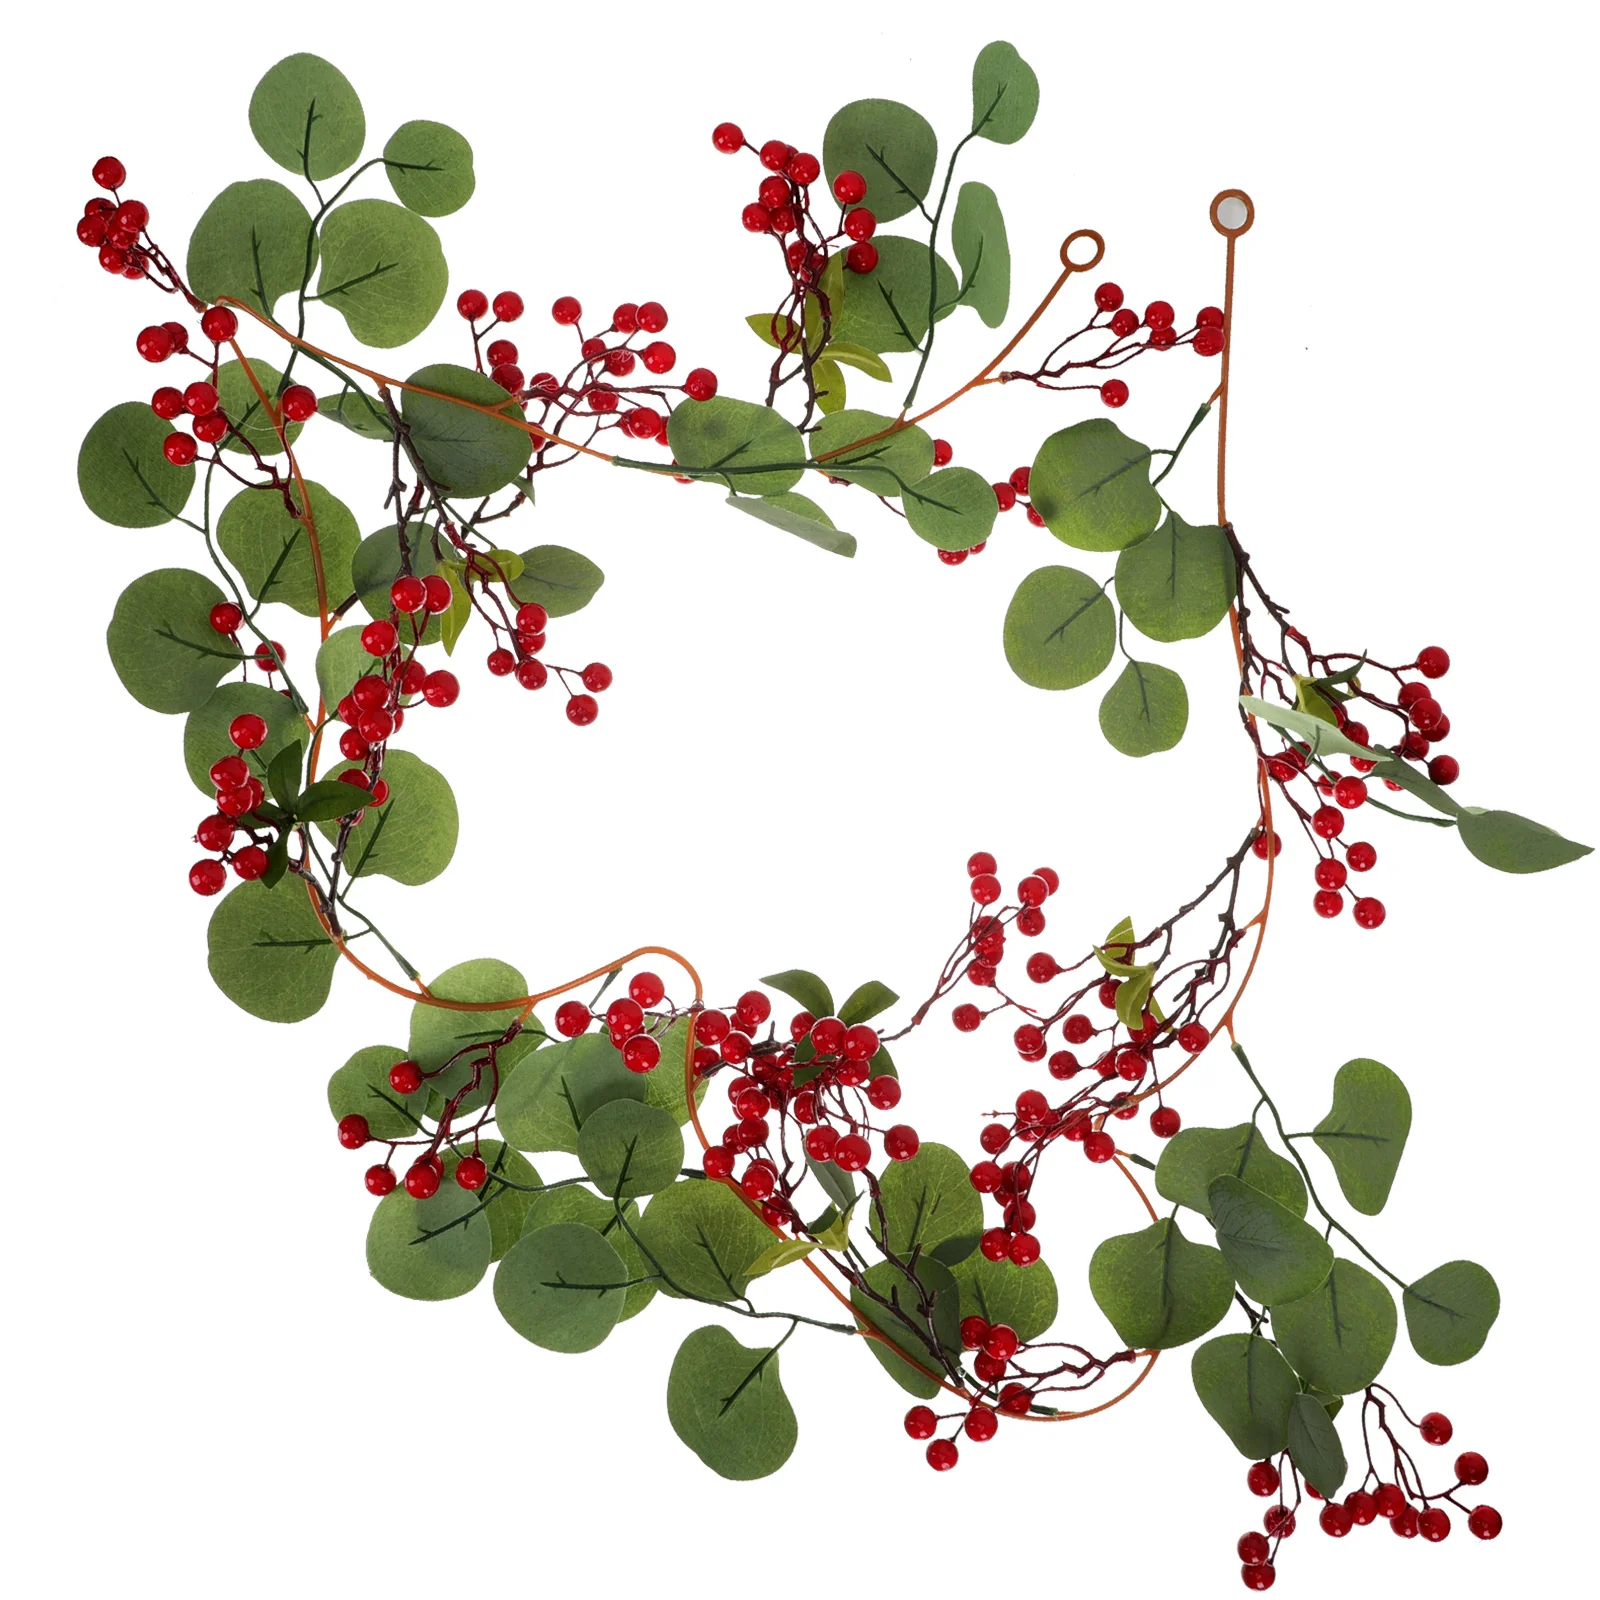 

Hanging Garland Artificial Fake Simulation Leaves Vine Decor Rattan Leaf Berry Eucalyptus Holly Garlands Twig Rustic Red